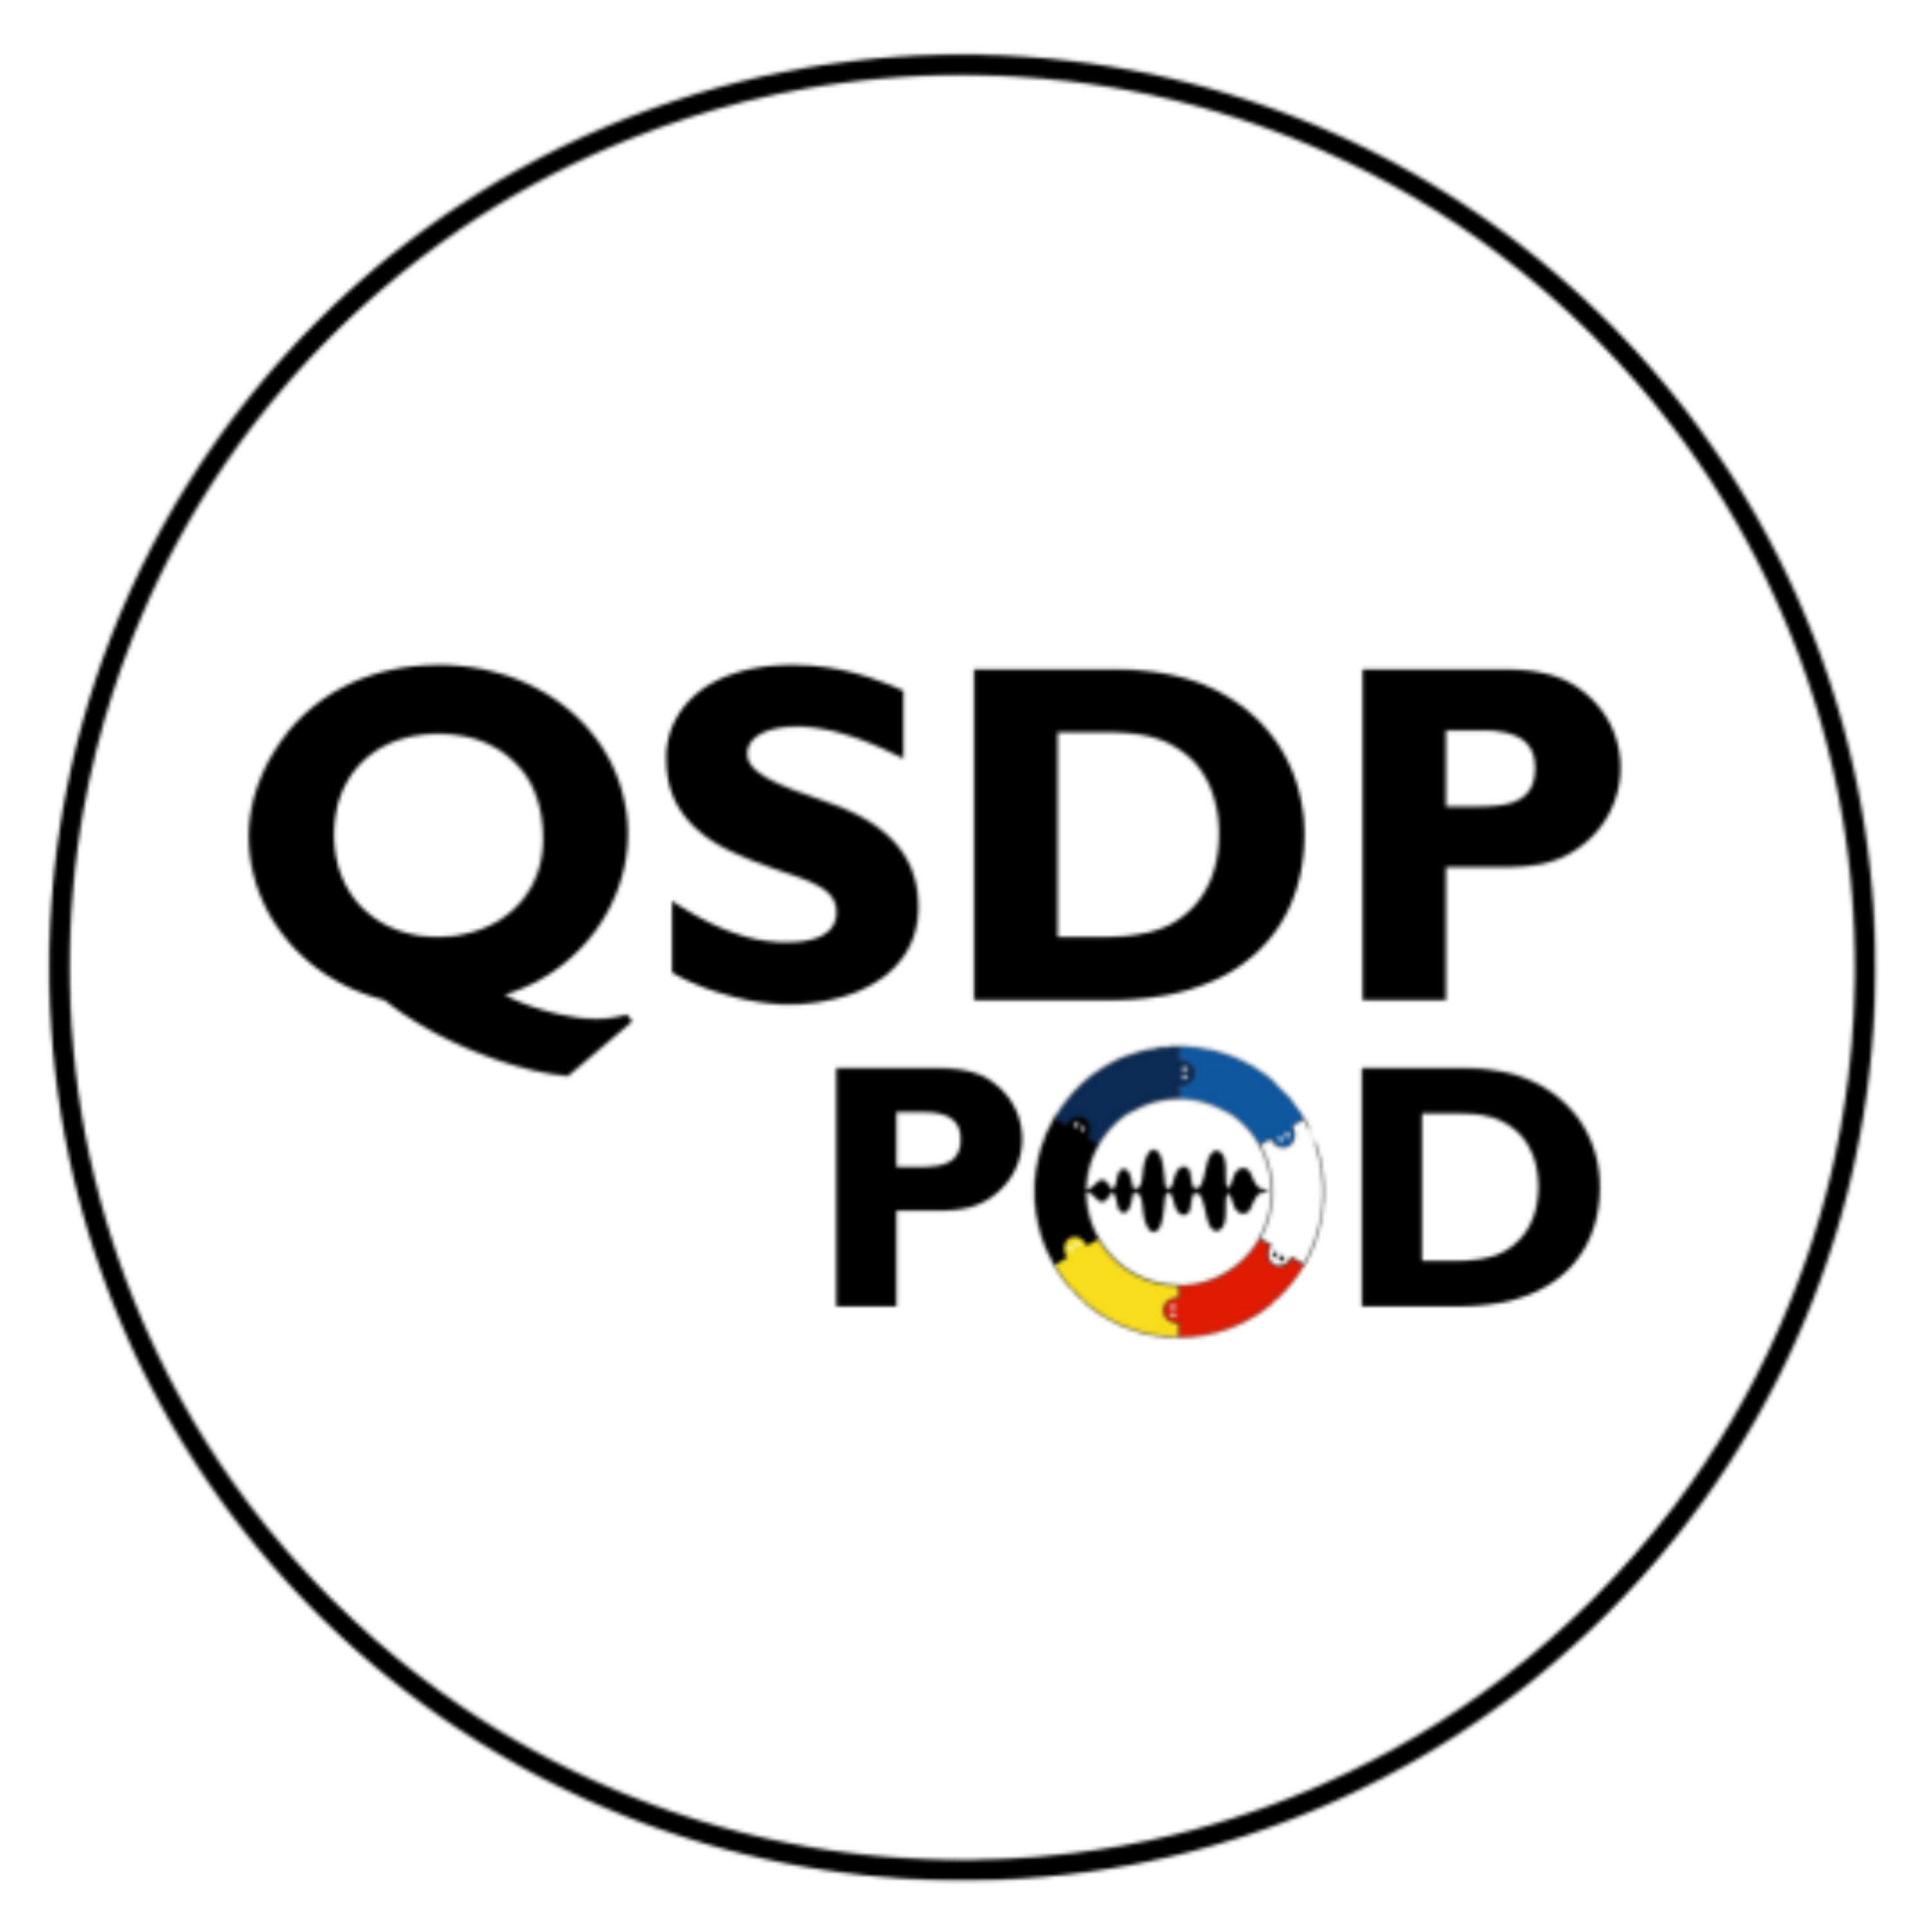 QSDP Podcast - CFRC Podcast Network